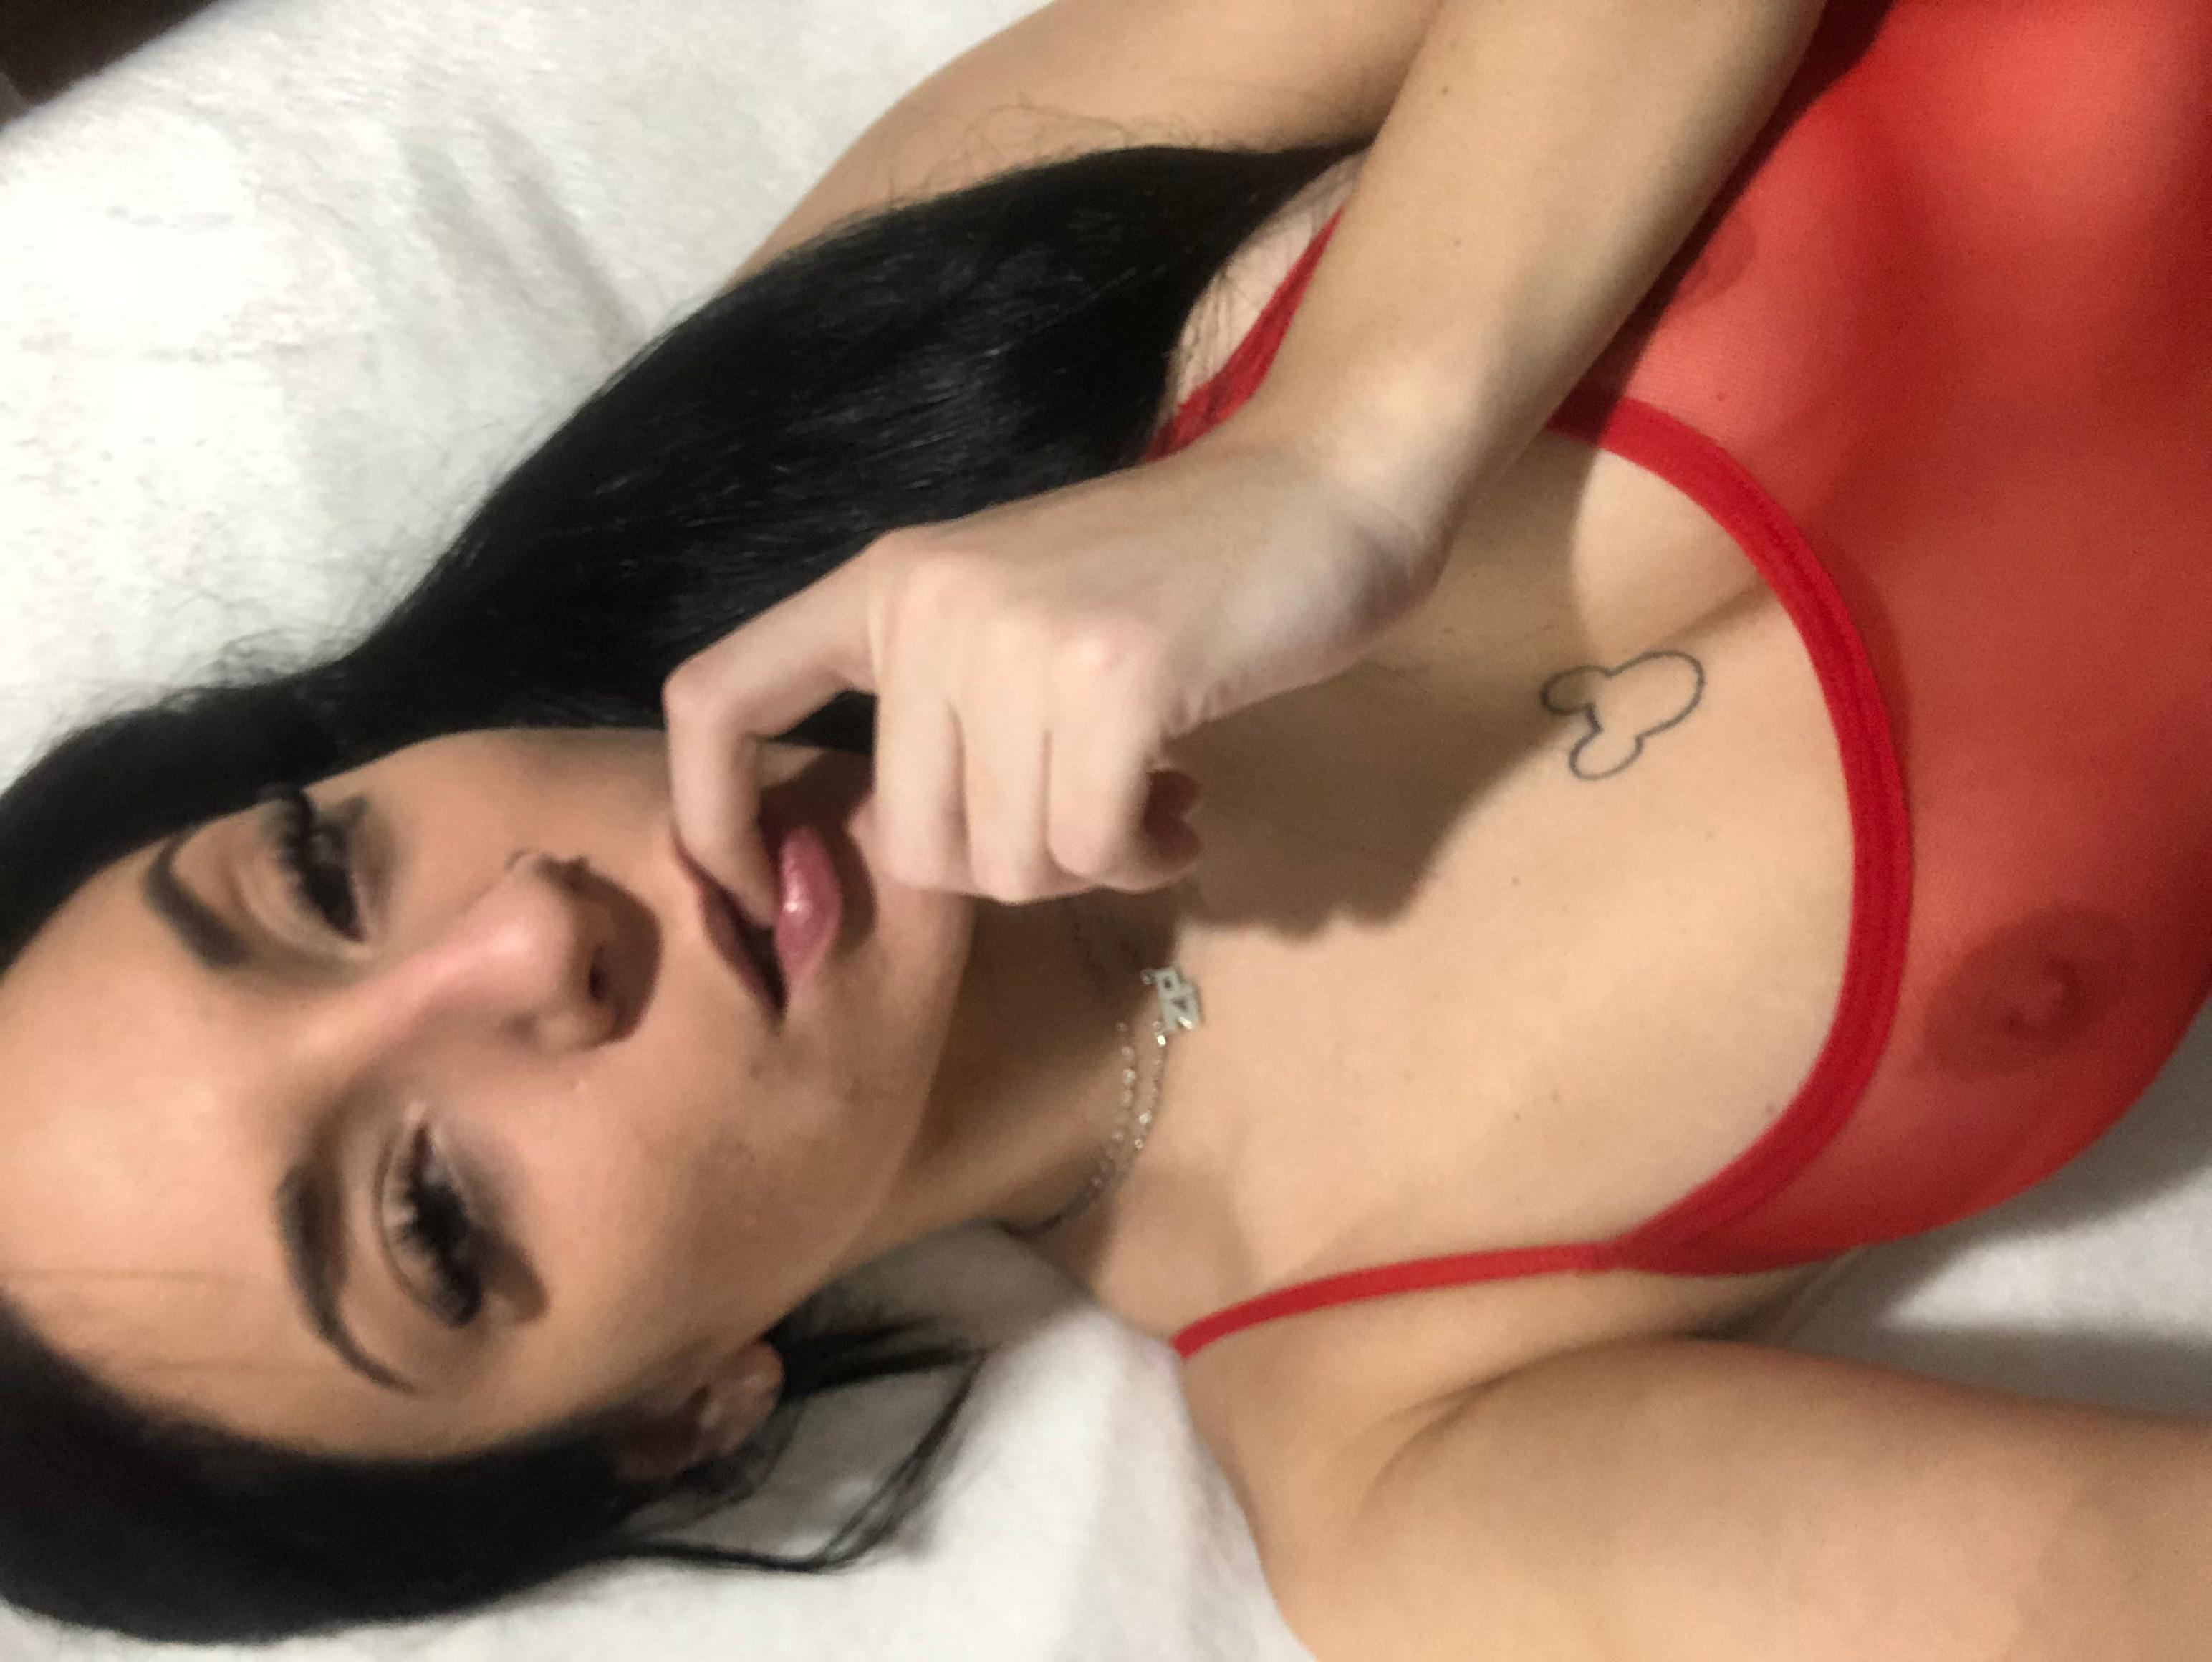 live chat porn Zowilowi